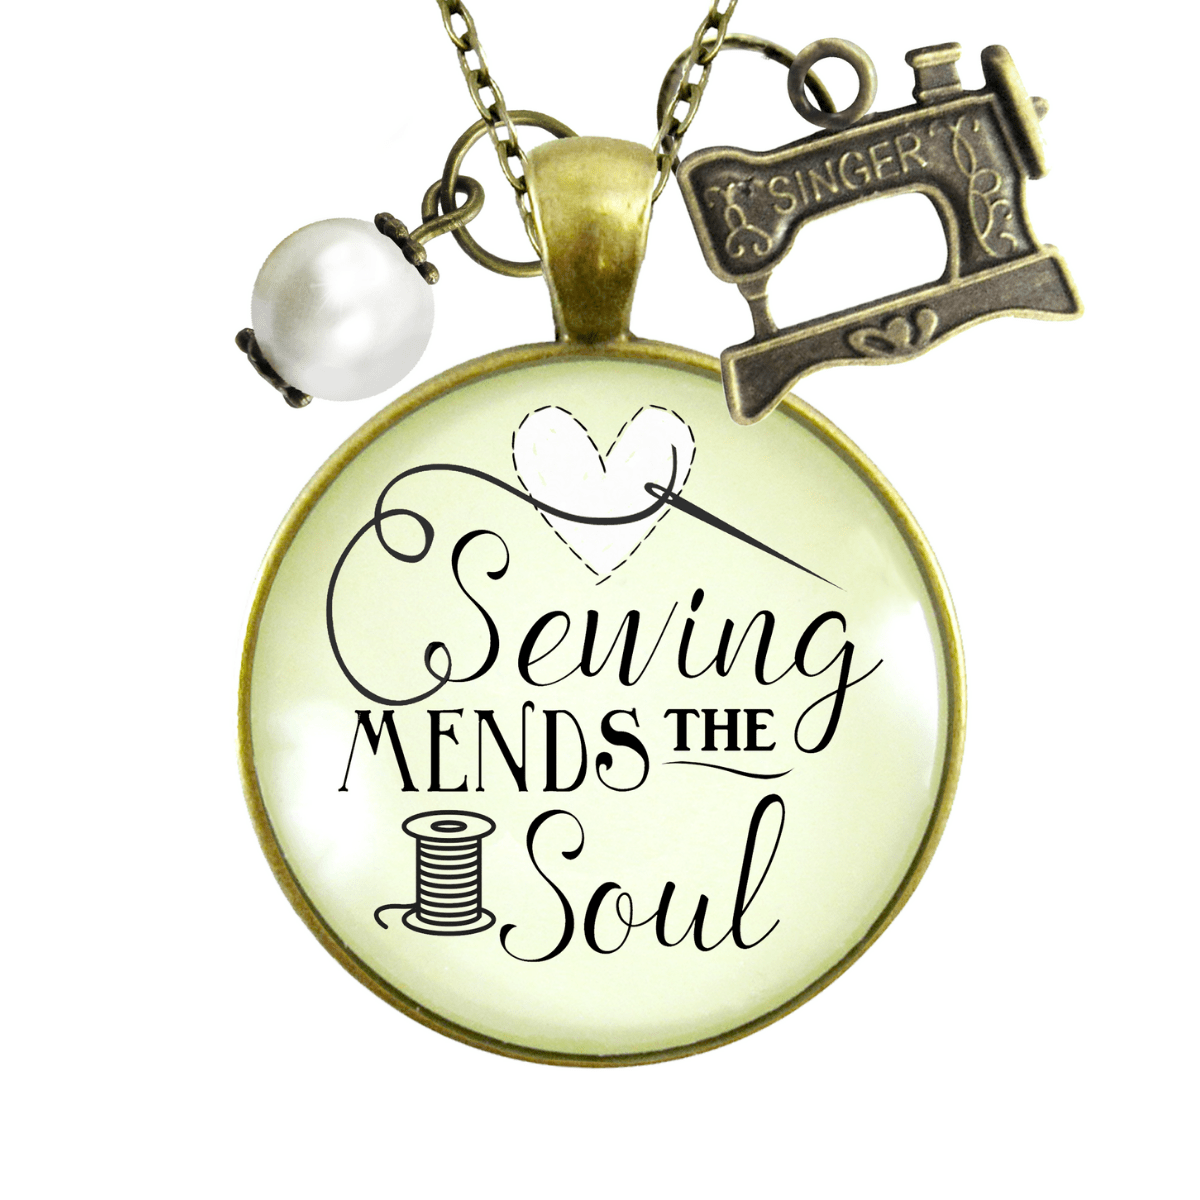 Gutsy Goodness Sewing Mends Soul Seamstress Necklace Jewelry Gift Machine Charm - Gutsy Goodness;Sewing Mends Soul Seamstress Necklace Jewelry Gift Machine Charm - Gutsy Goodness Handmade Jewelry Gifts